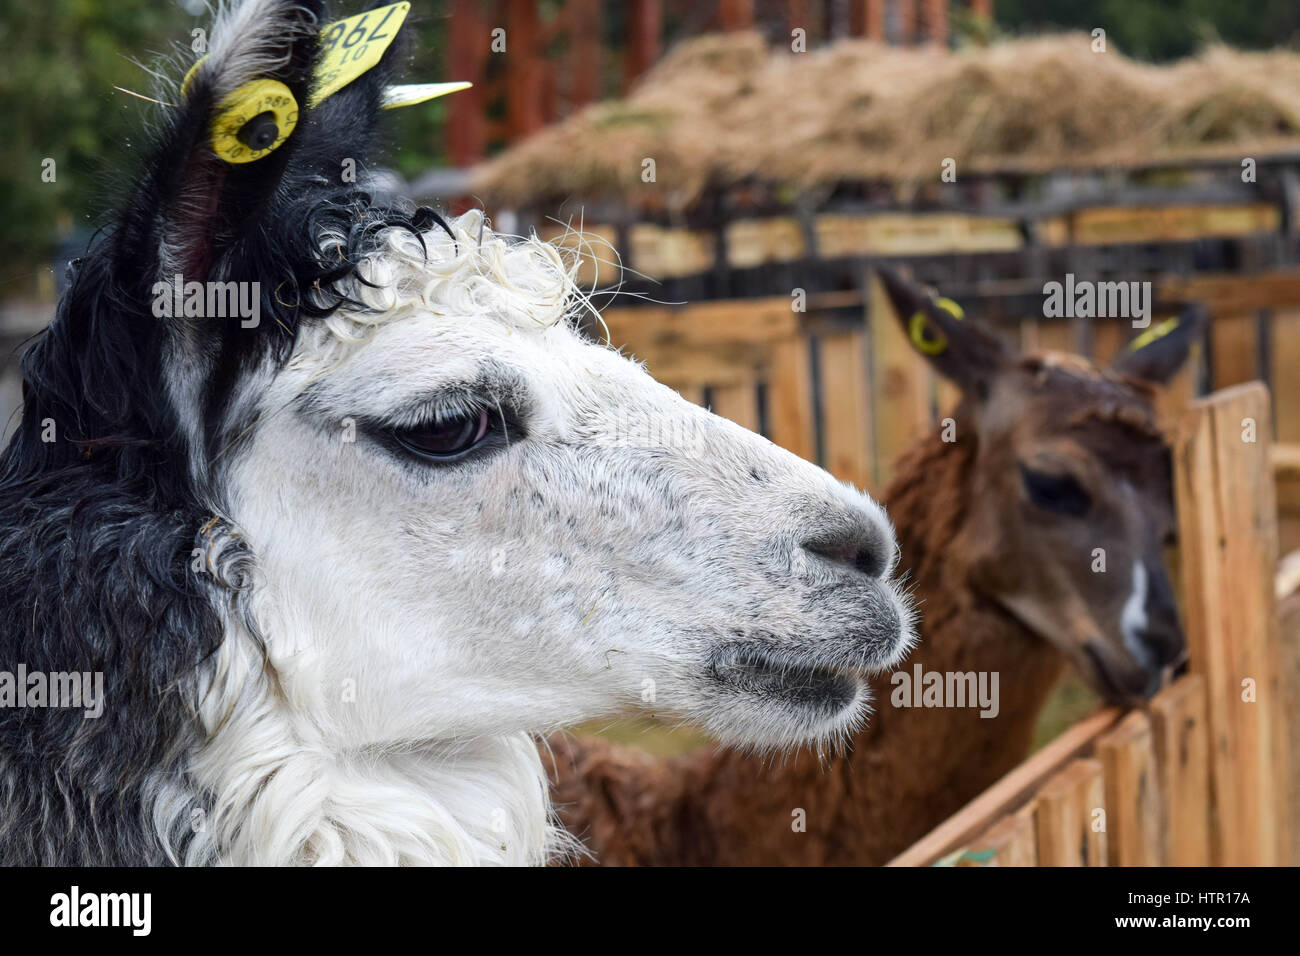 Picture of two llamas during the Festival Costumbrista Chilote Stock Photo